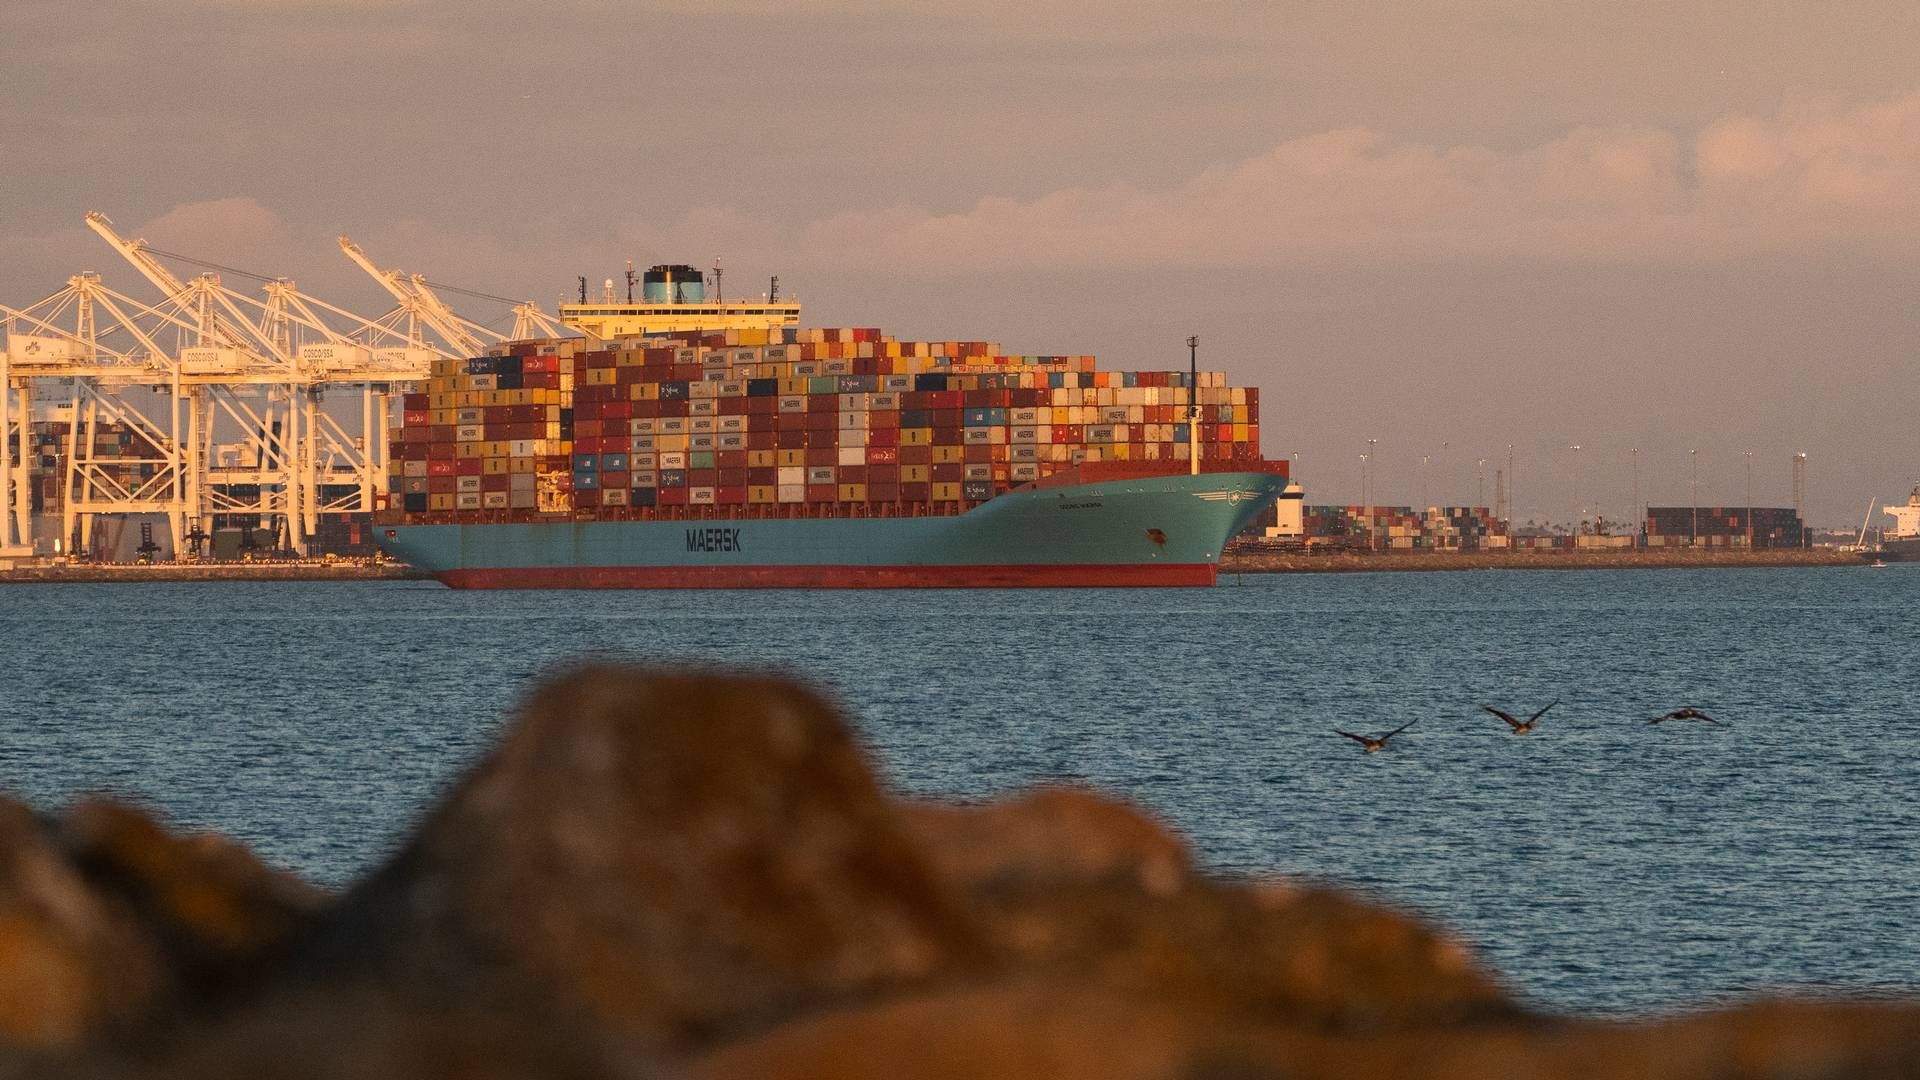 Maersk has previously warned that ship queues could materialize if the ports of Los Angeles and Long Beach are hit by labor conflicts. Maersk is one of the largest employers at the ports through its company APM Terminals. | Photo: Damiian Dovarganes/AP/Ritzau Scanpix